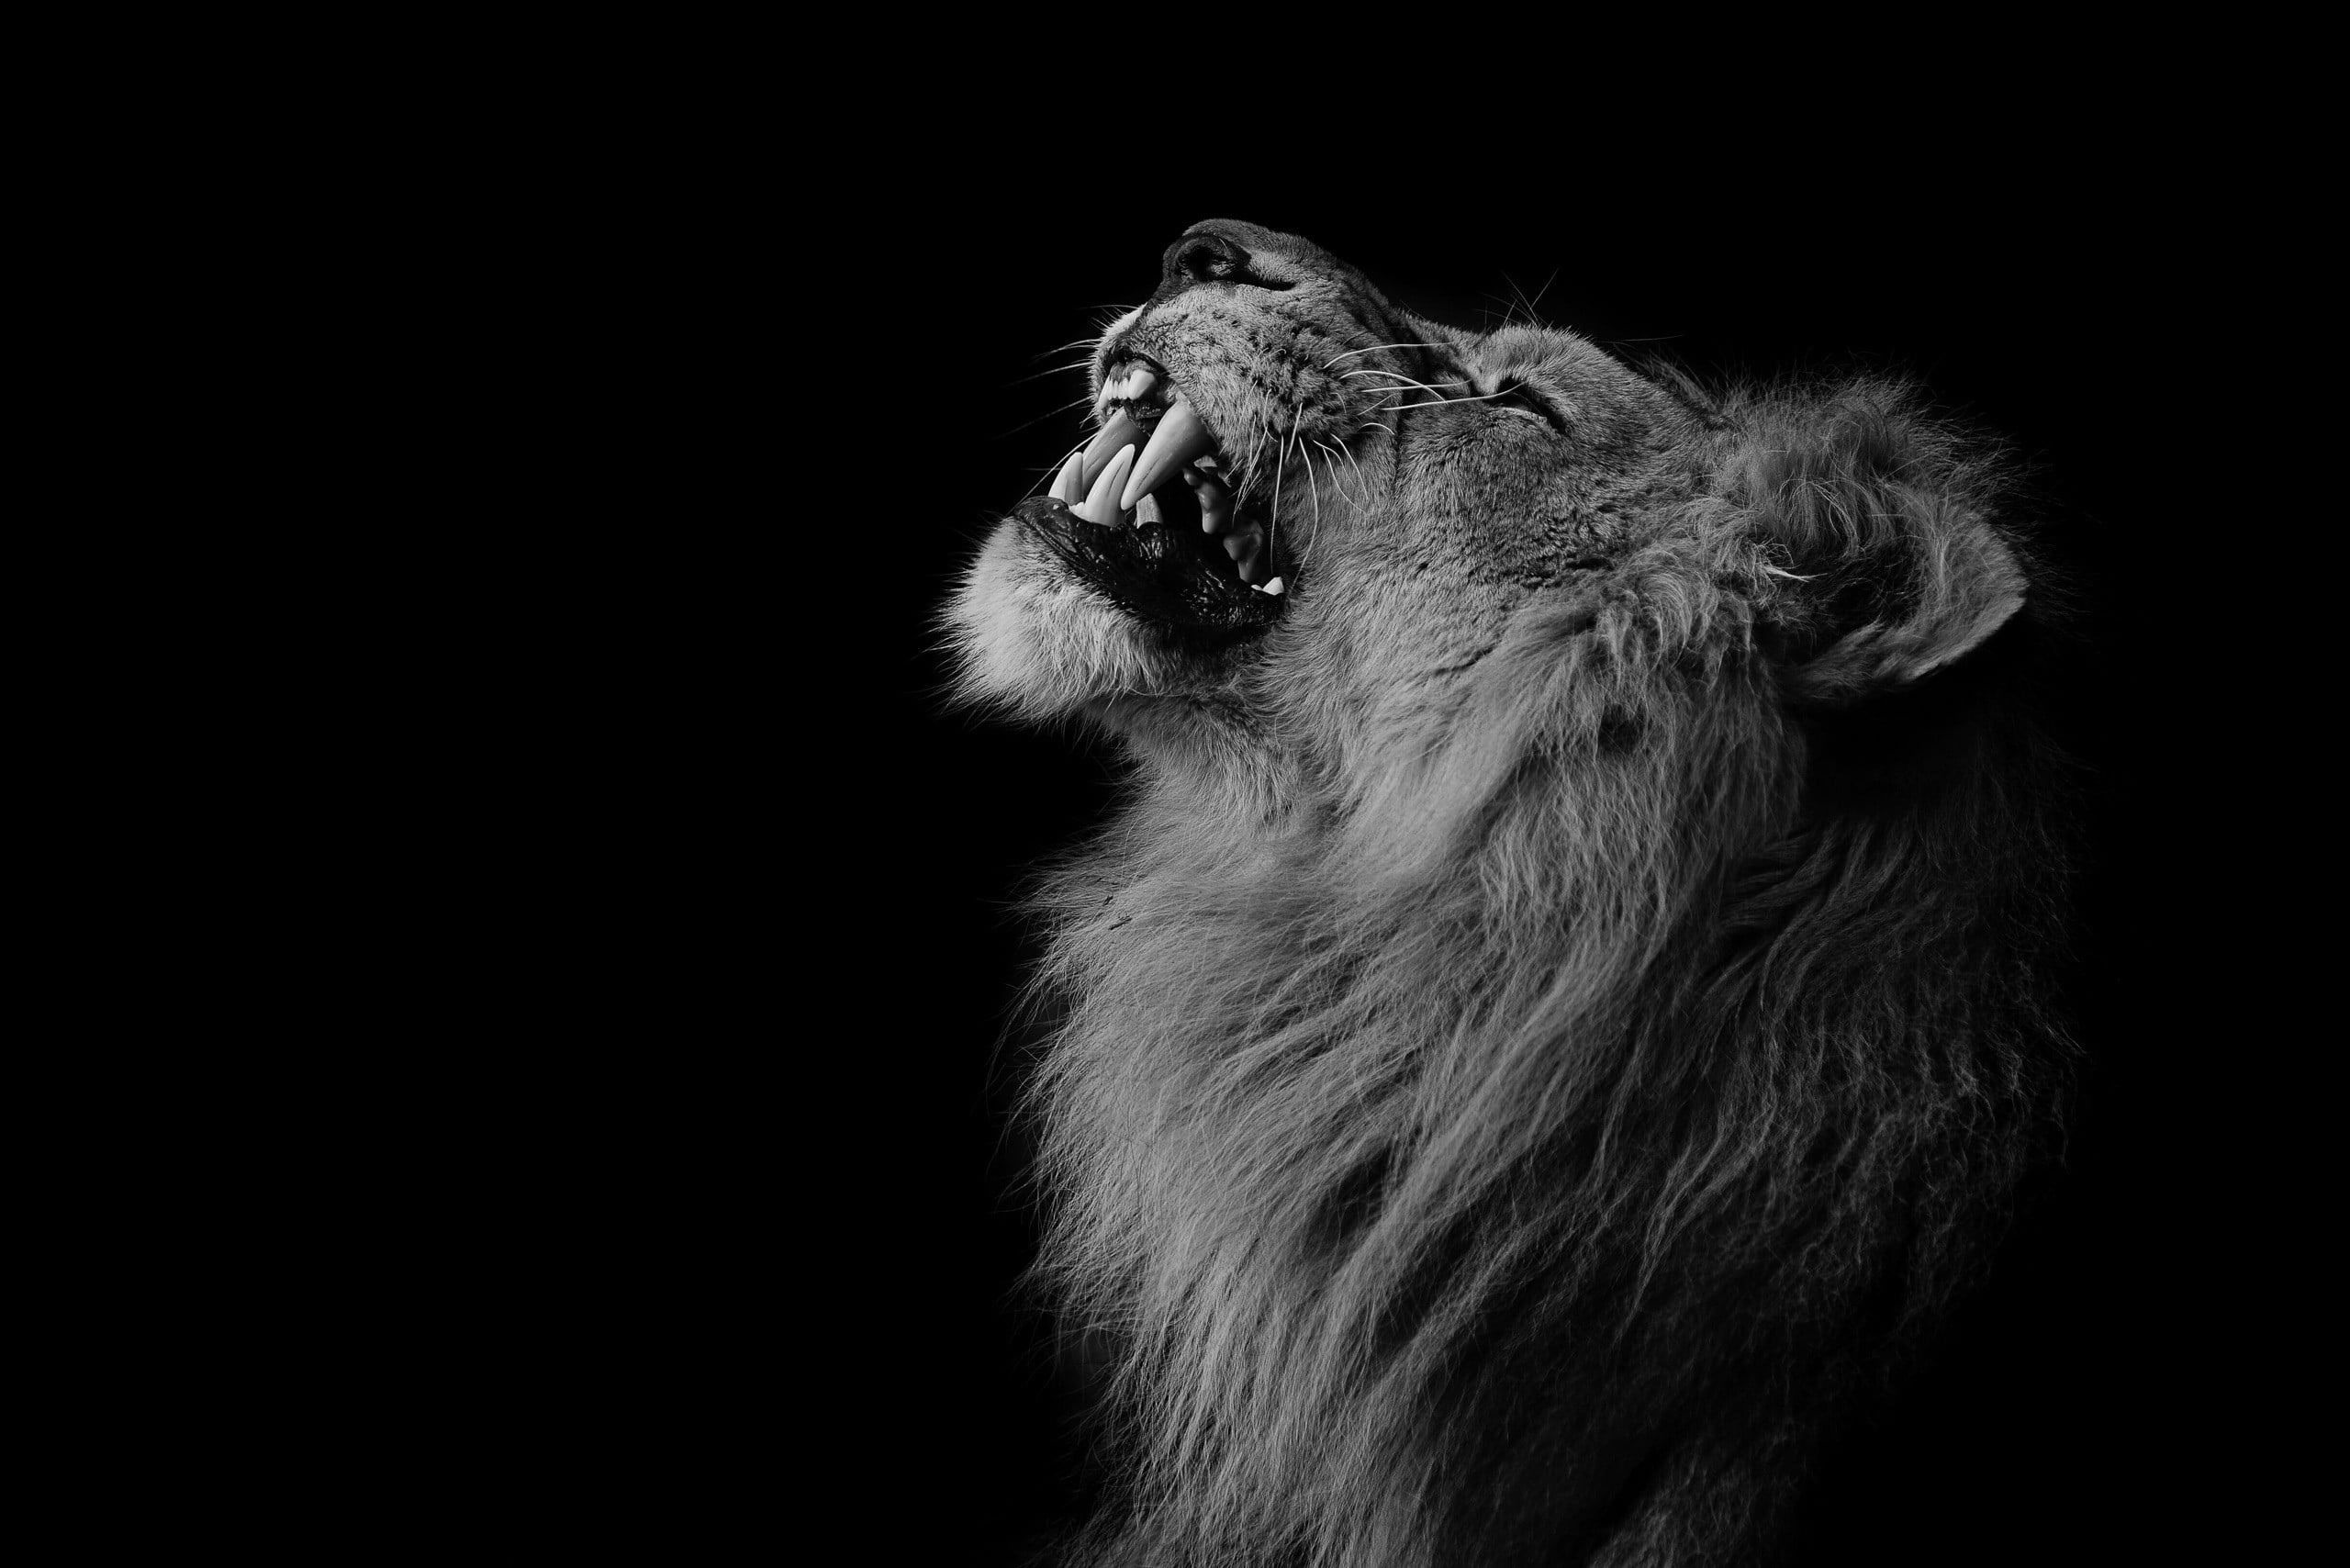 A black and white image of an animal - Lion